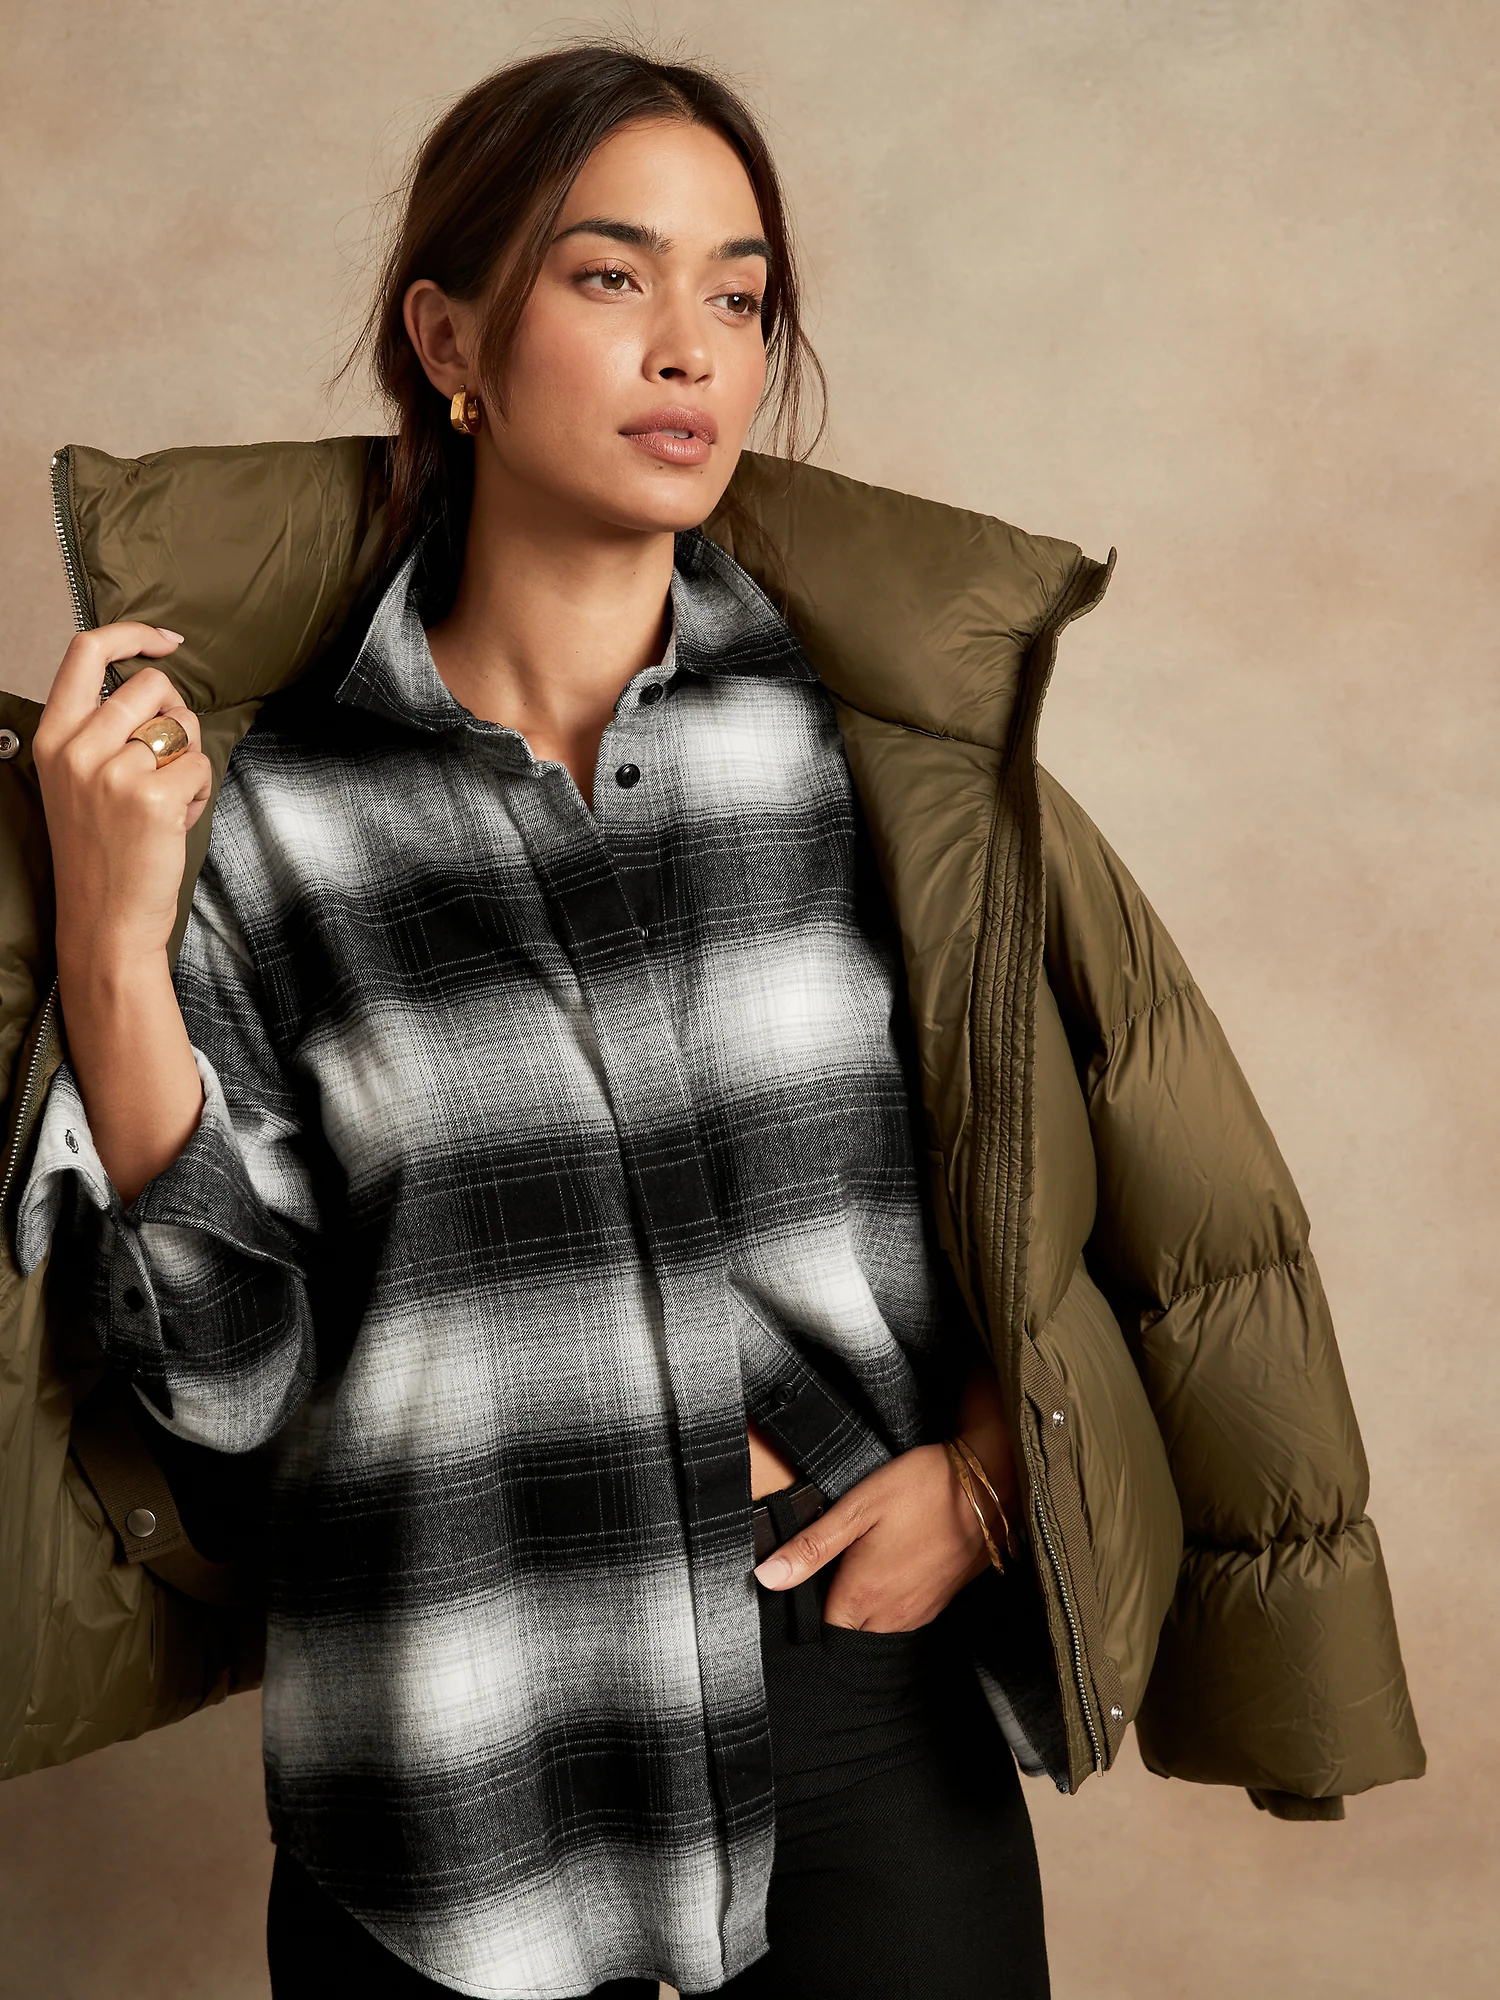 screencapture-file-Users-dmo-Downloads-BANANA-REPUBLIC-HOLIDAY-2021-Petite-Classic-Fit-Organic-Flannel-Shirt-webp-2021-12-13-18_14_37.png